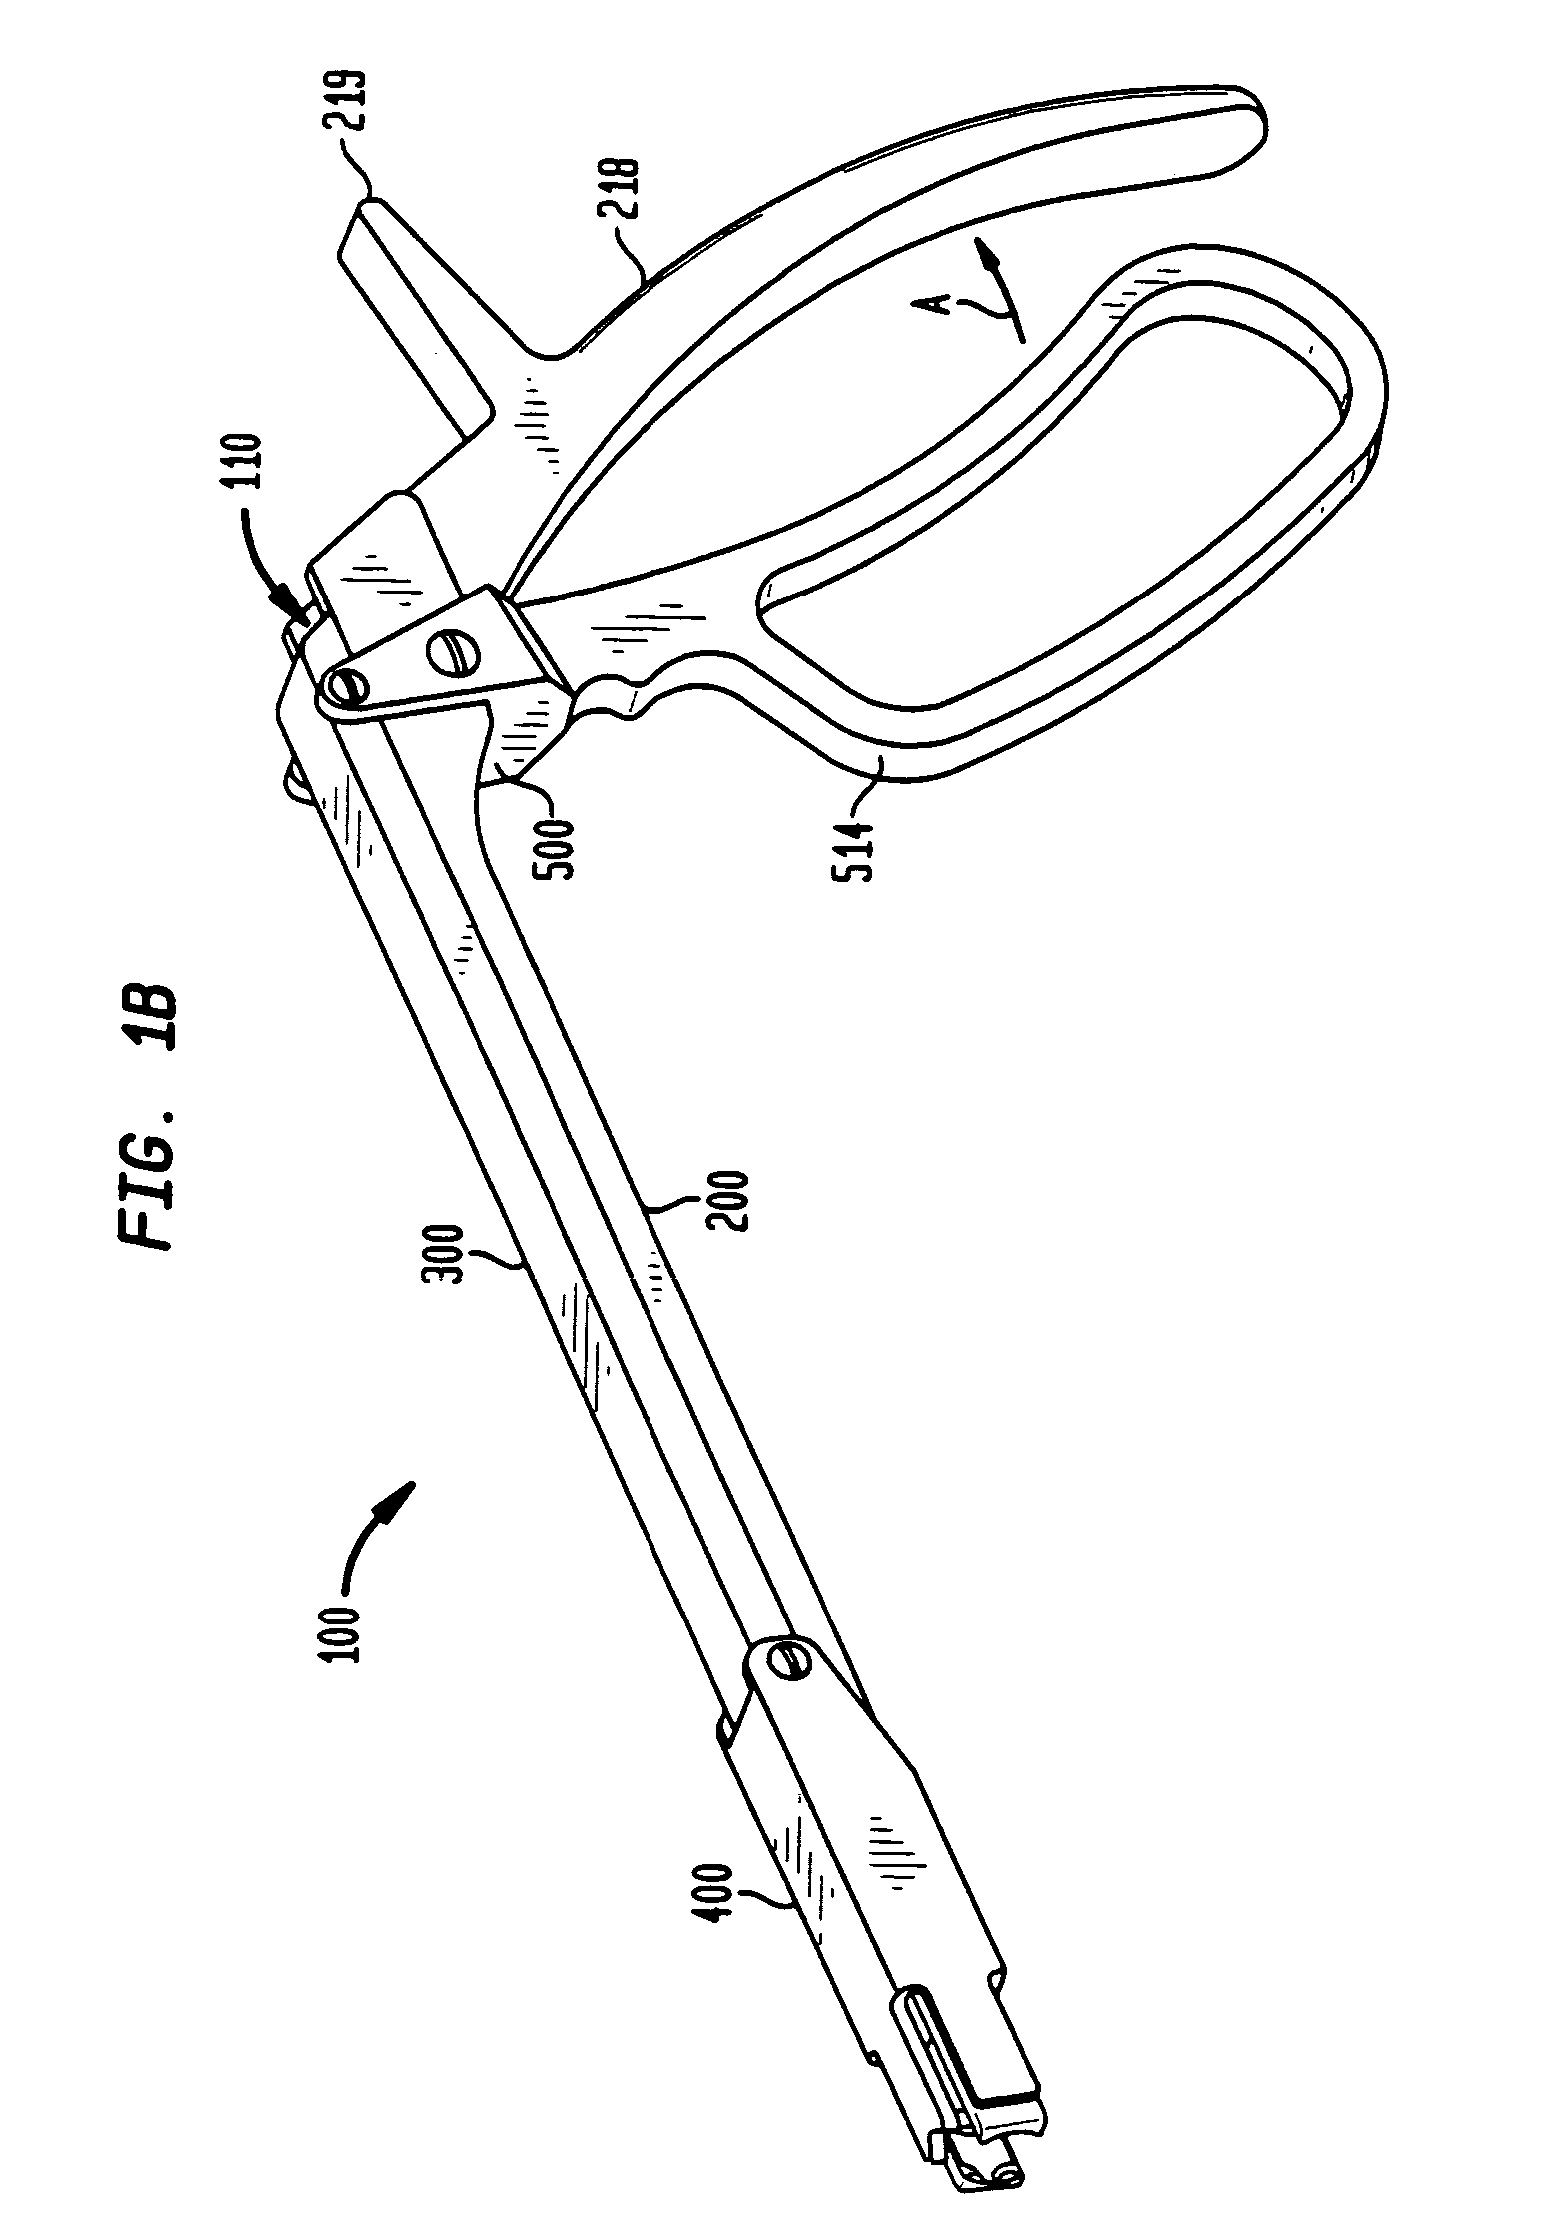 System for use in spinal stabilization